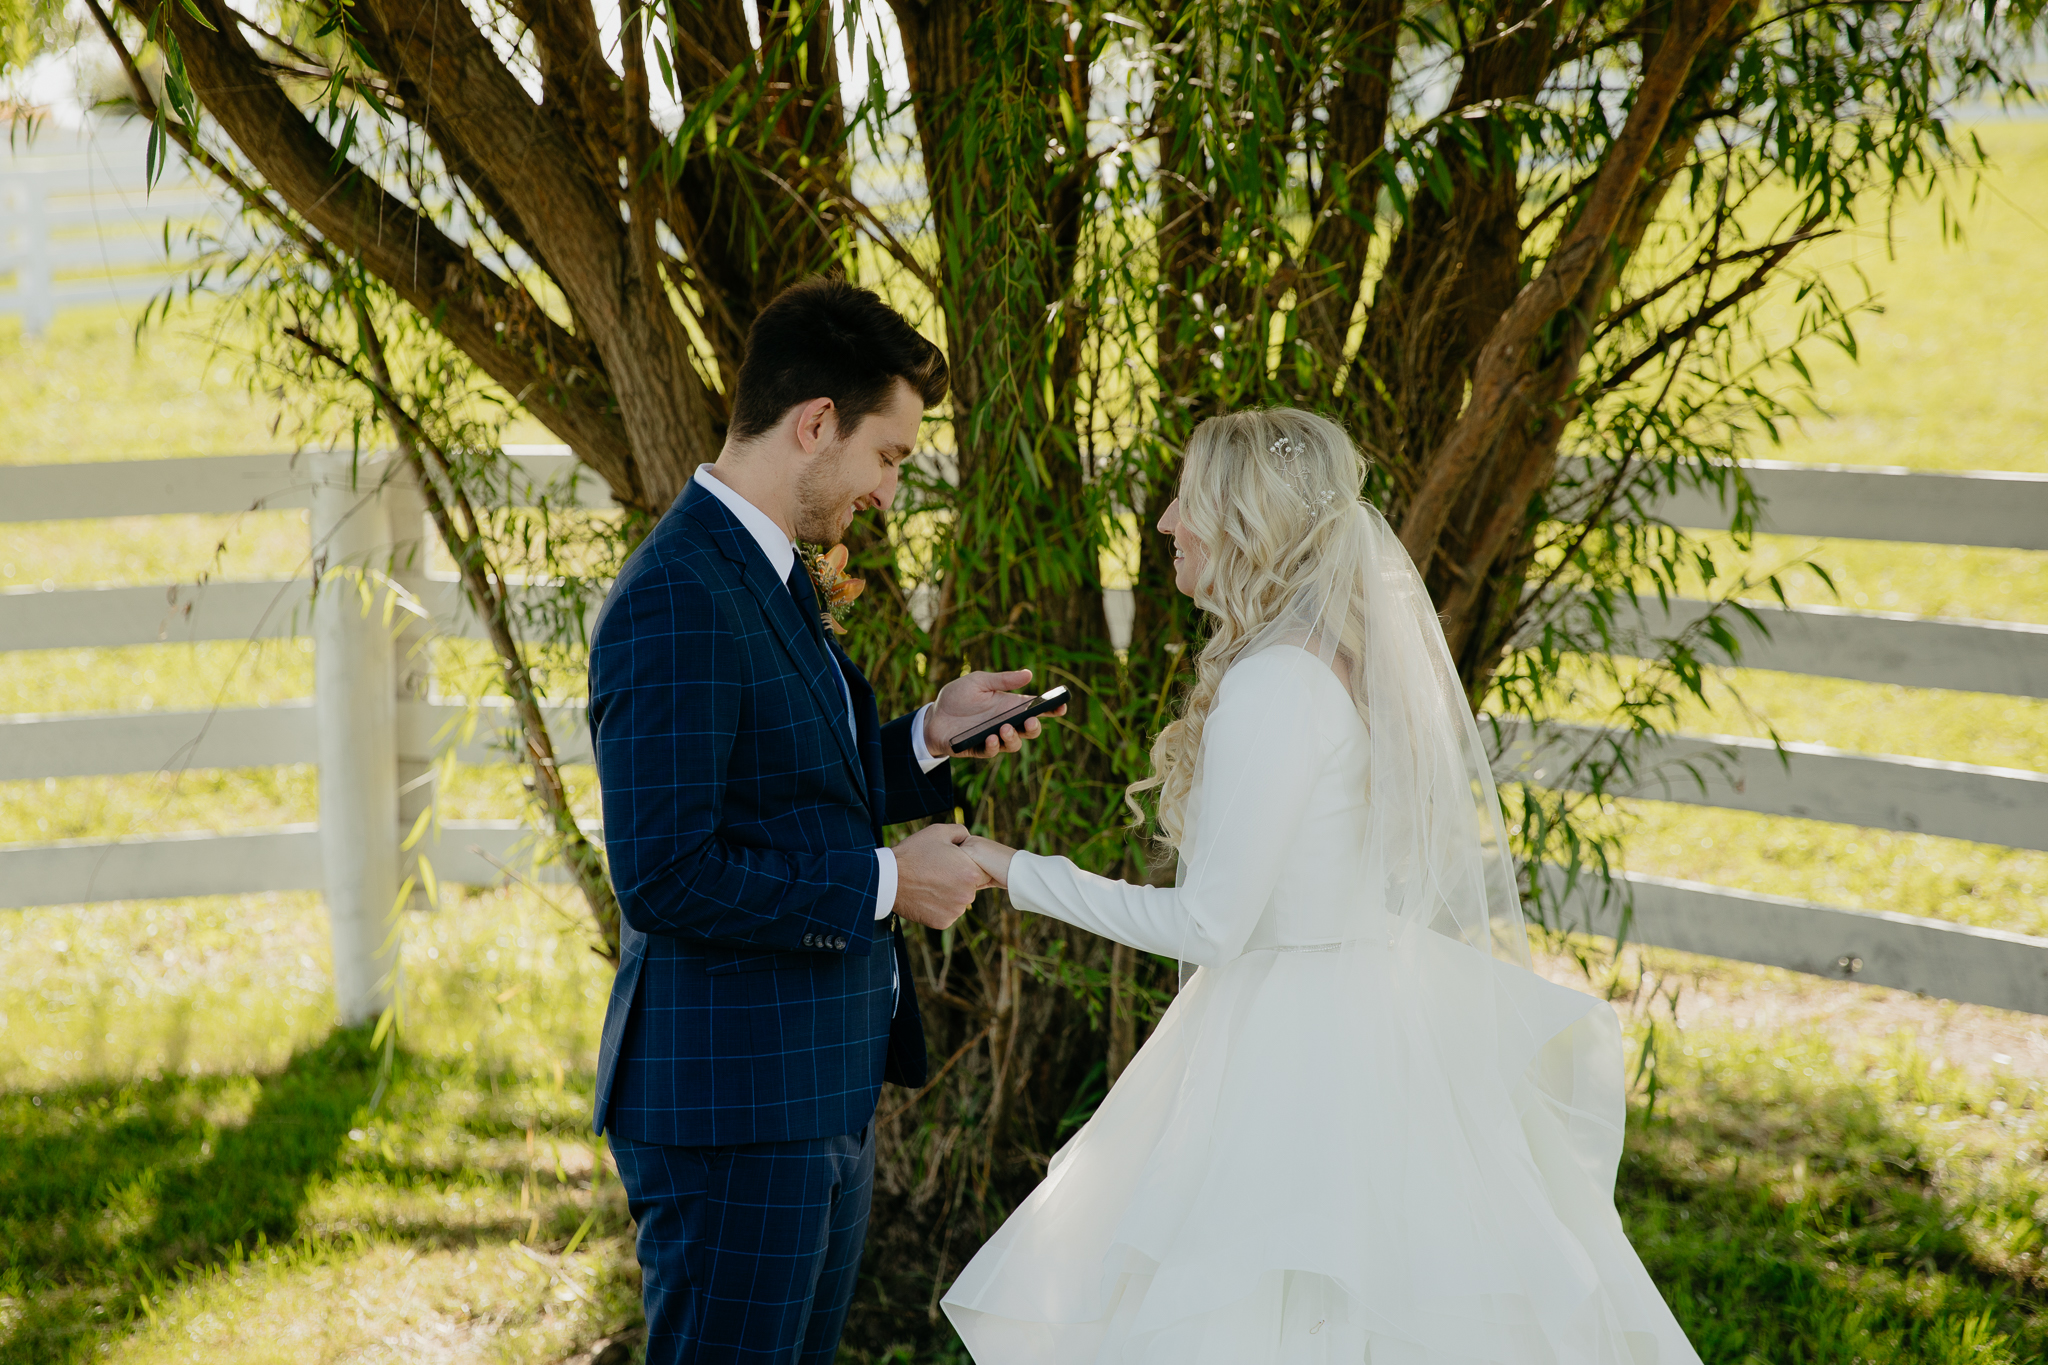 Groom reads vows to bride underneath a willow tree on his phone